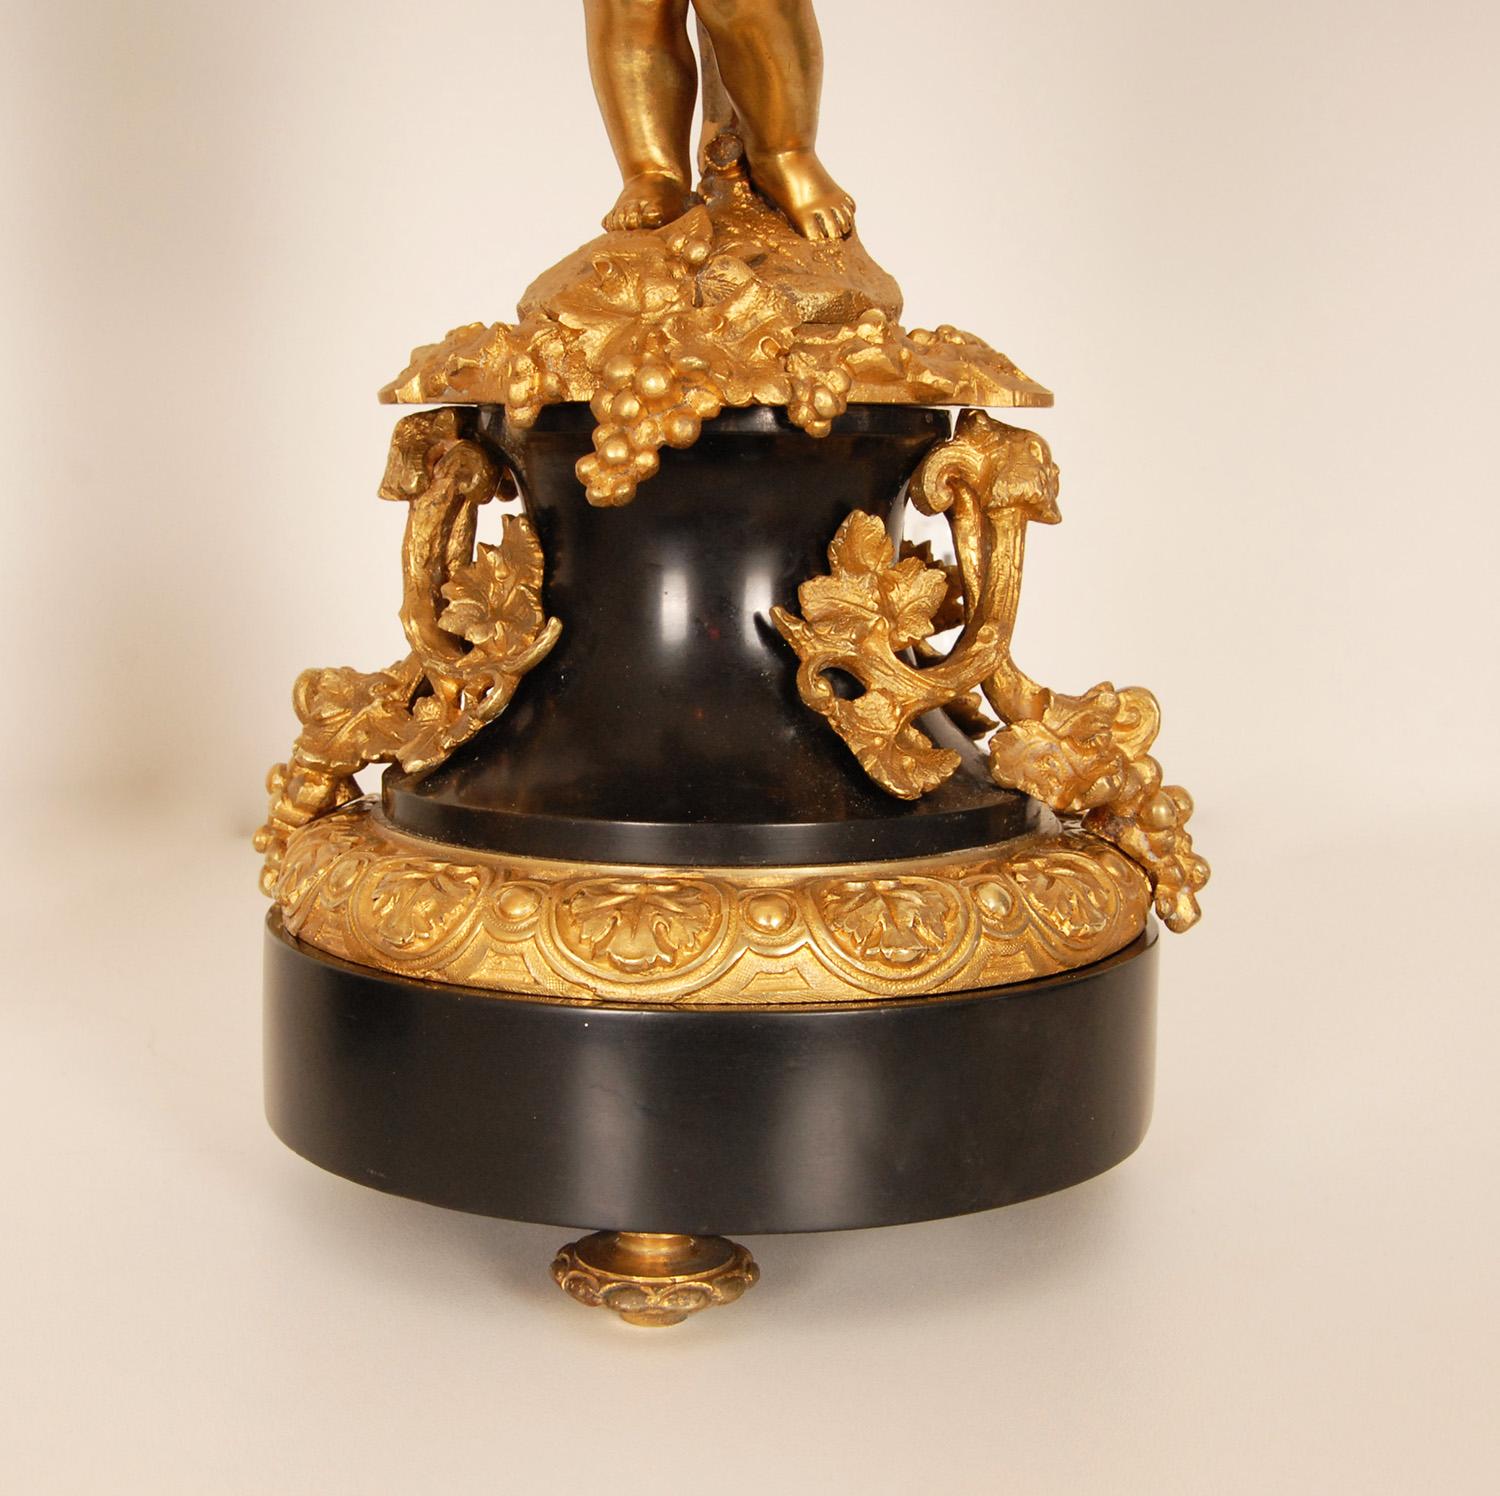 Antique French Gilt Bronze and black marble Candelabras Putto holding 6 light torches
Material: Gold gilded bronze and black marble.
Design: In the manner of Claude Michel Clodion, Henri Picard, Thomire and Francois Linke
Style: French, Antique,